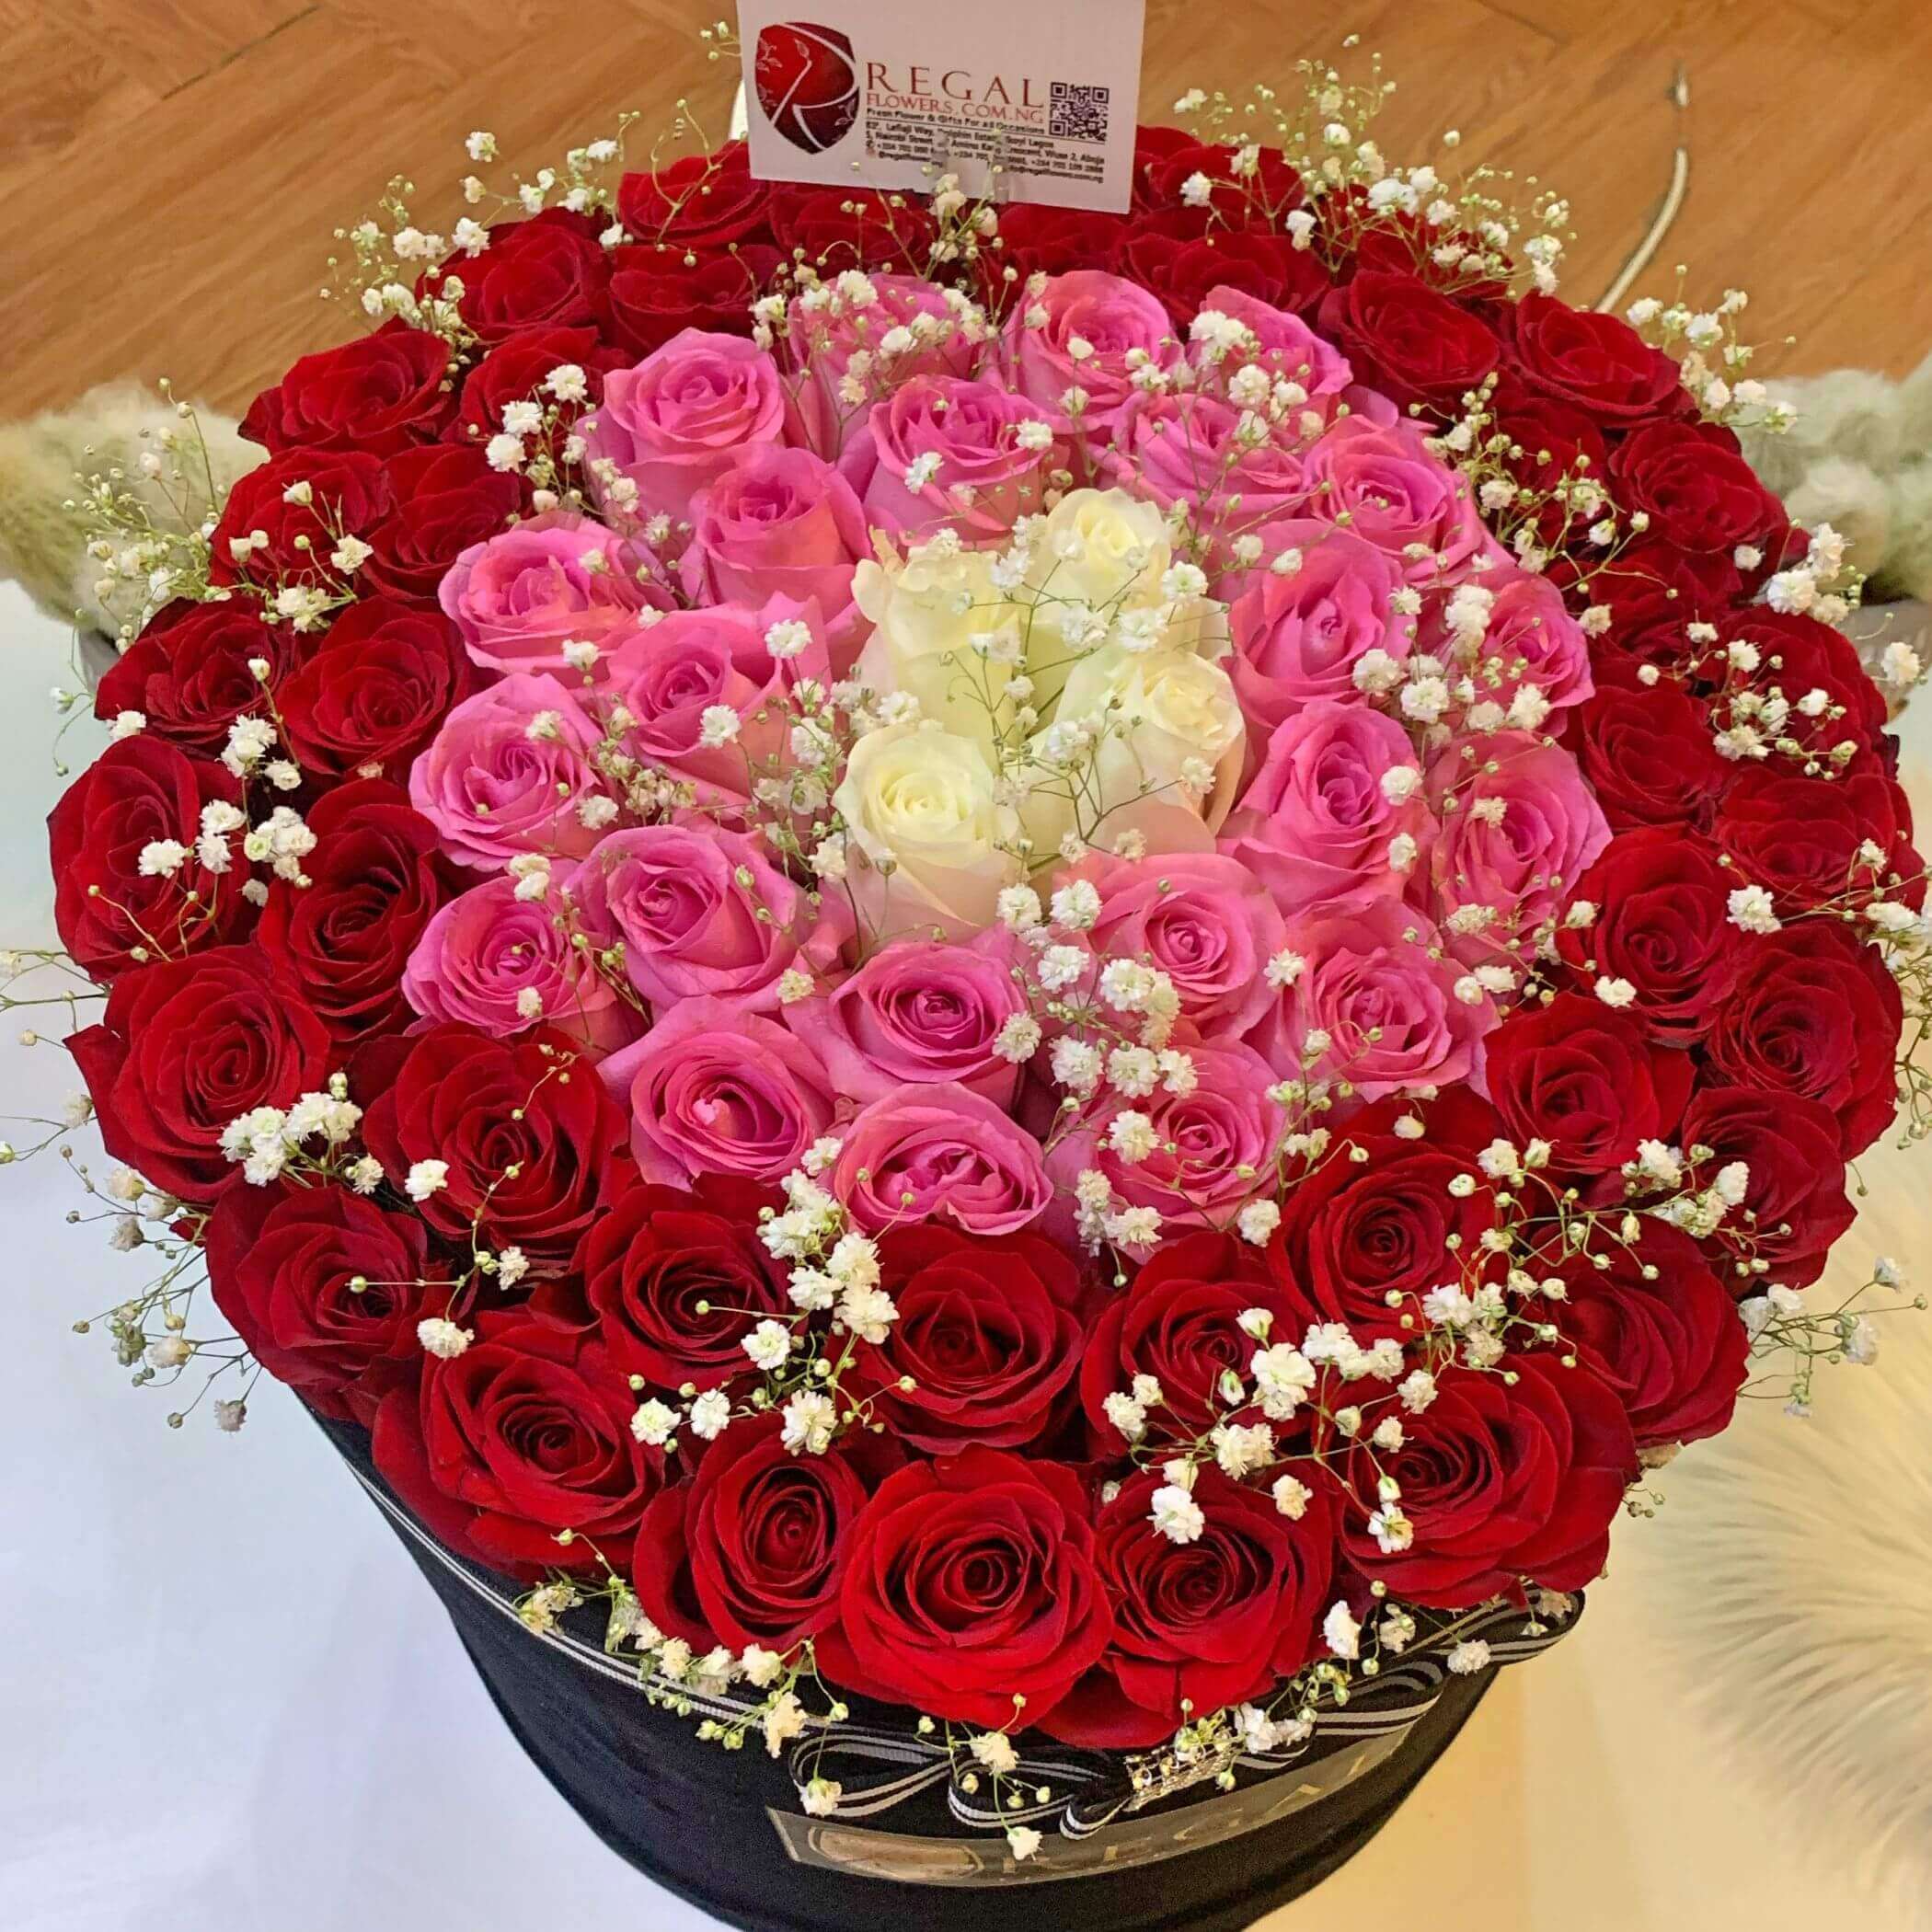 Red Roses, Pink Roses and White Roses with Gypso and Guylian Chocolate, bouquet of Flowers for her in Abuja, Birthday Flowers, Same day flowers delivery in Lagos